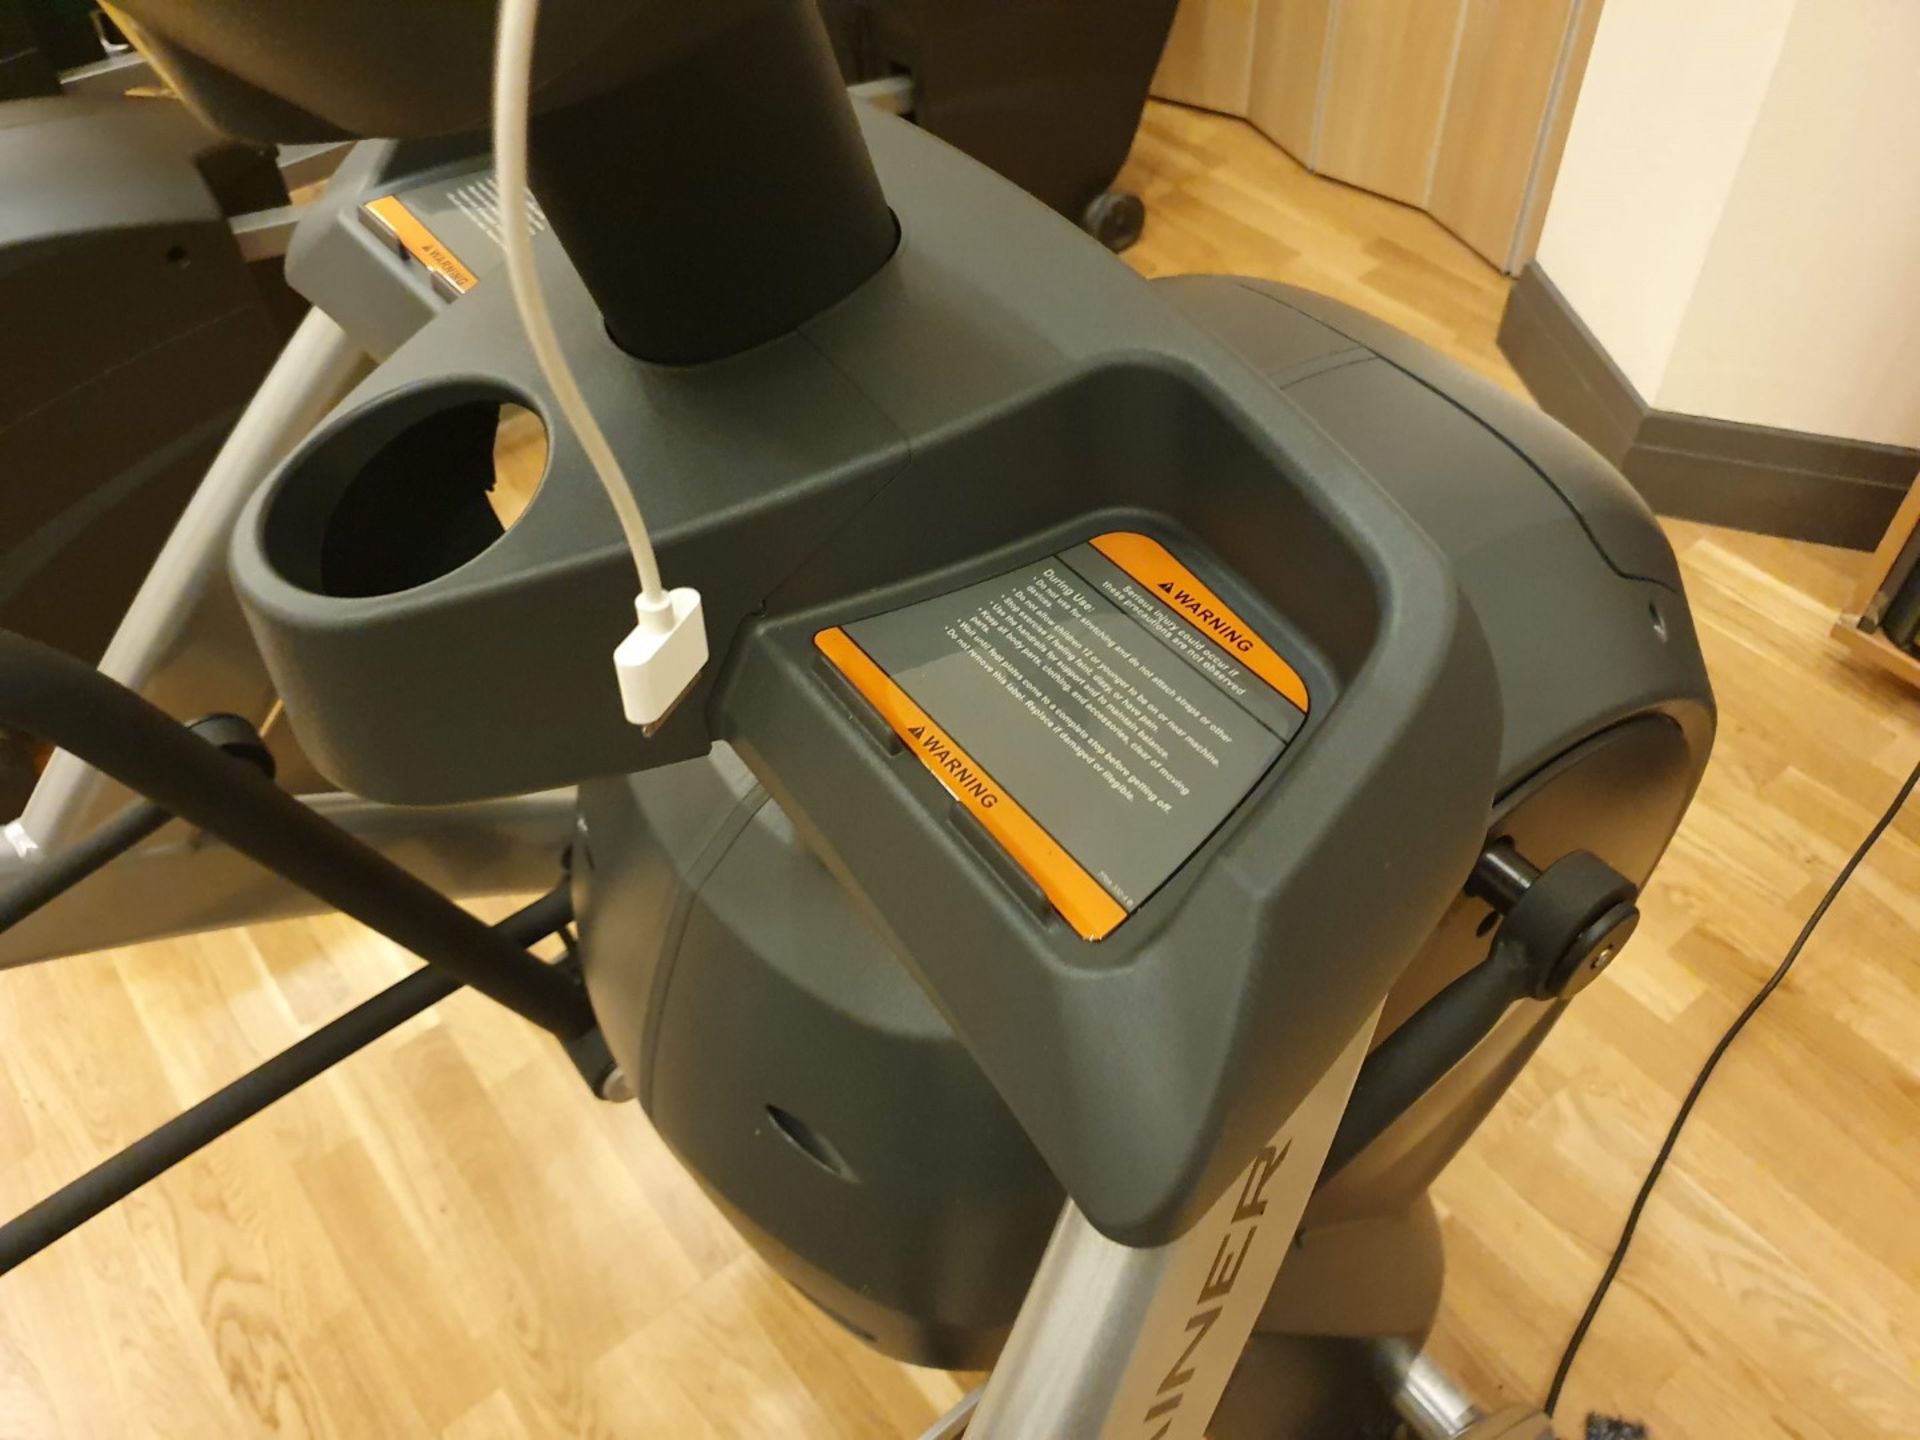 1 x Cybex Stepper Arc Cross Trainer With E3 Colour Screen Console, Phone Charger, USB Sockets, - Image 4 of 8